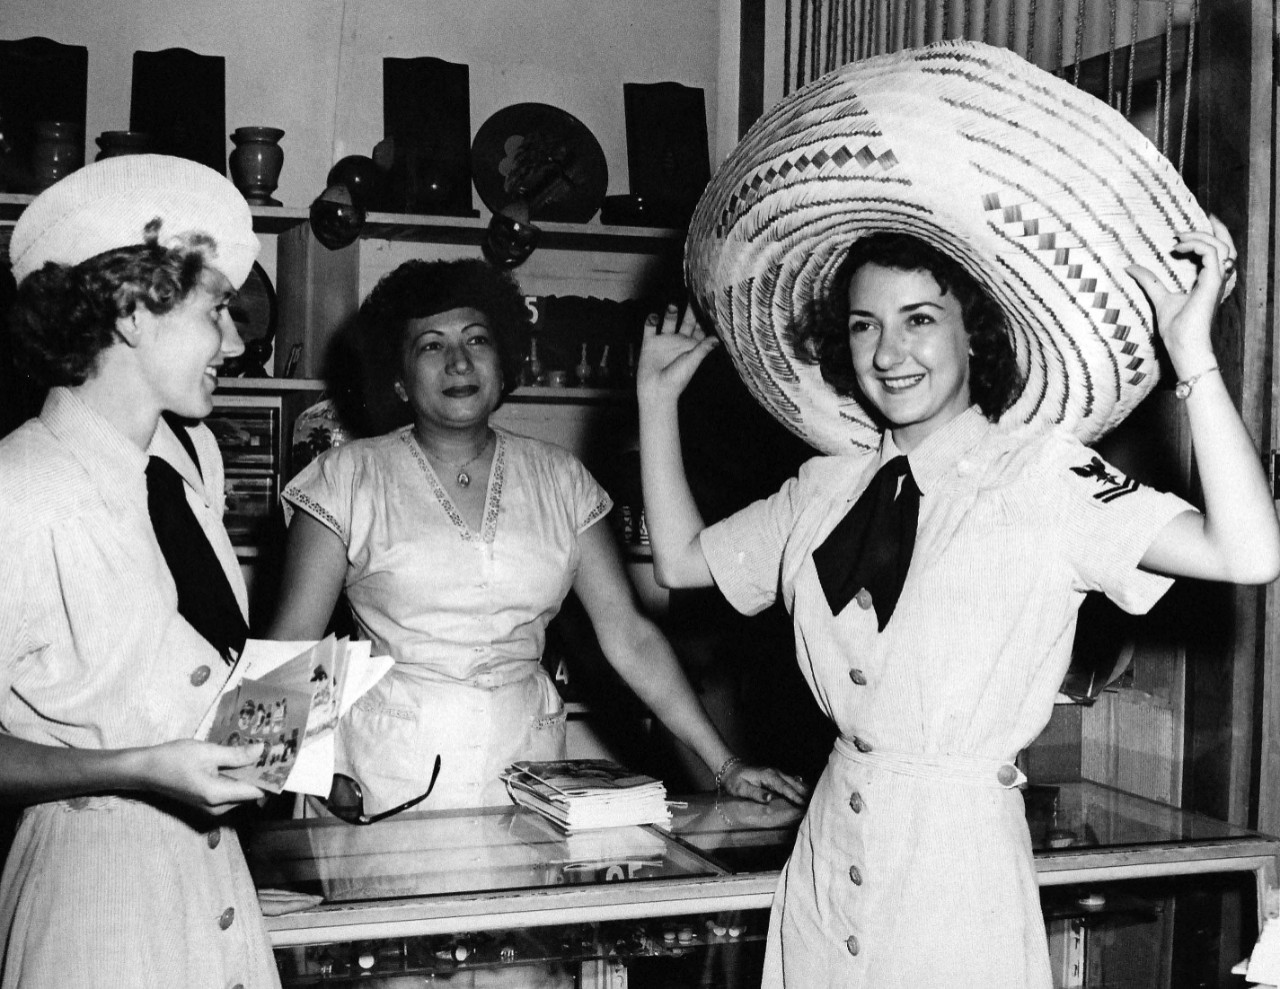 USN 709023:    Selecting interesting souvenirs of moderate price is one of the privileges of world travelers, October 1953.  HM2 Eileen Paluzzi tries on a hand-made beach hat, which she decided not to buy.   HM3 Maria Myers bought some postcards to send to the folks back home.    Photograph released October 26, 1953.   Master Caption:   Navy Accepts Women Volunteers for Duty on the High Seas.   For the first time in history, the U.S. Navy has accepted volunteers for duty on the high seas from women in the enlisted WAVES.  Those eligible were WAVES of the Hospital Corps to fill sixty-three billets on ships of the Military Sea Transportation Service.   Official U.S. Navy photograph, now in the collections of the National Archives.   